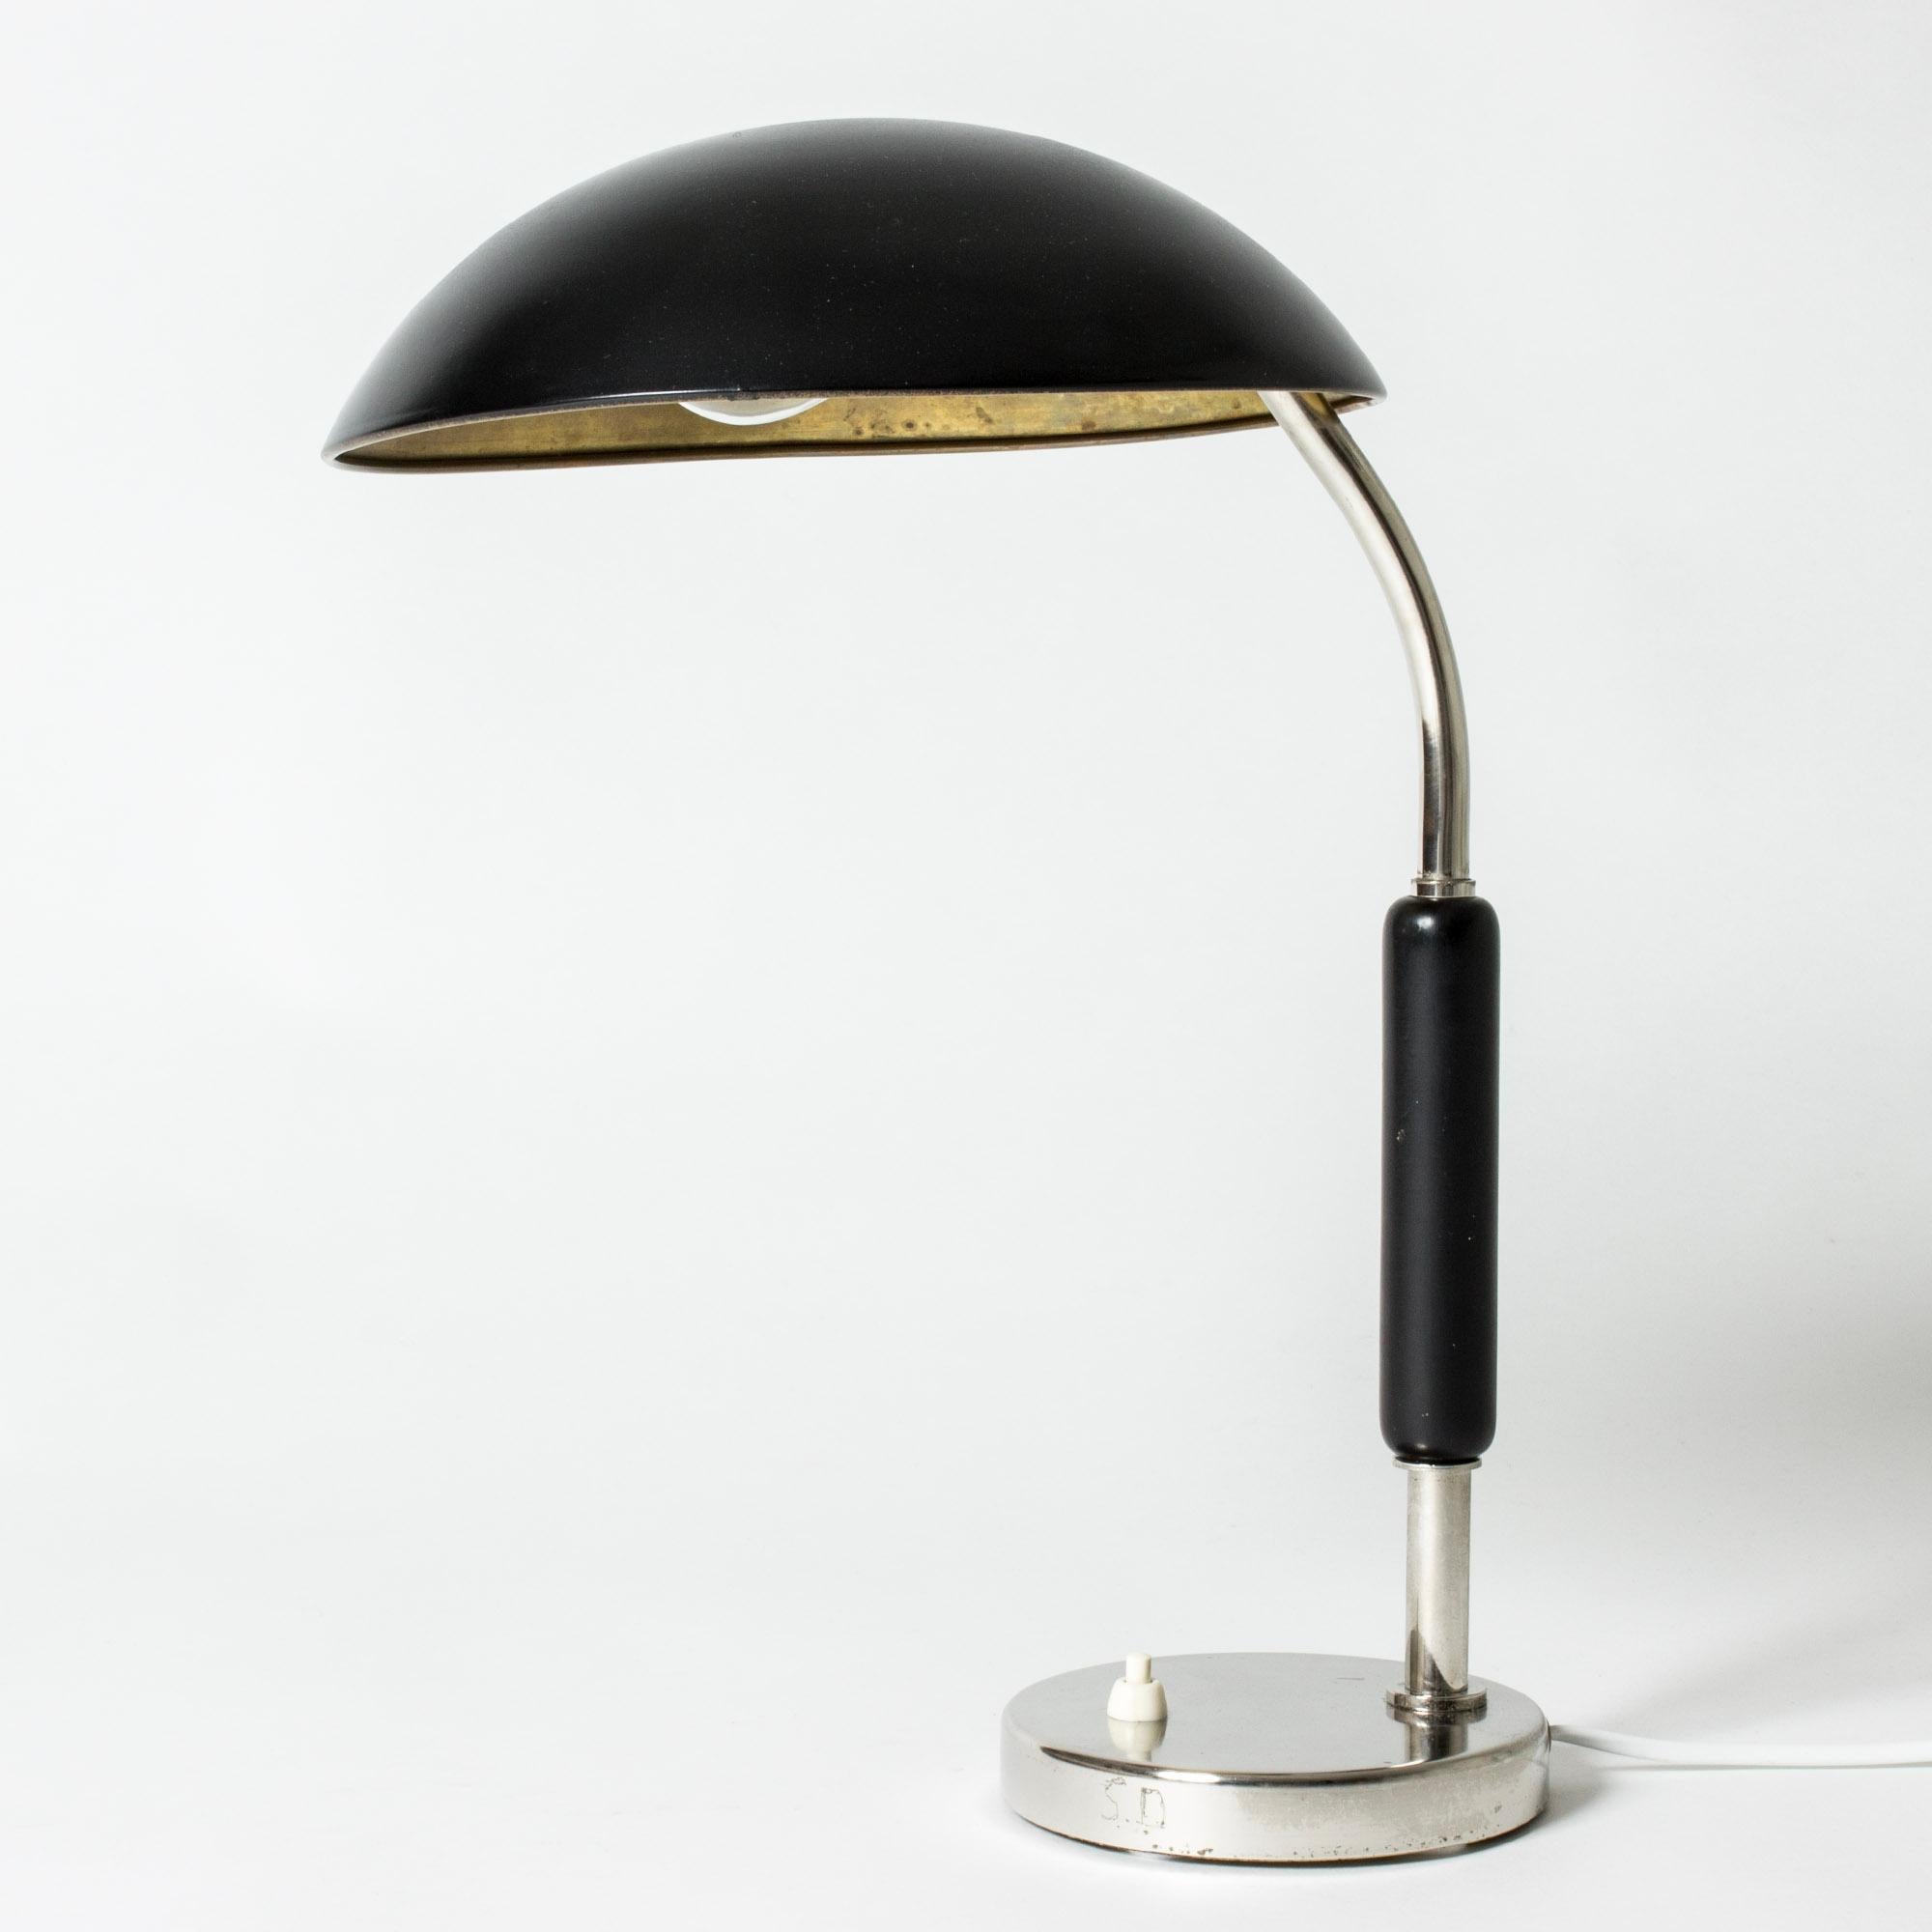 Cool functionalist table or desk lamp from ASEA, with smooth, graphic lines. Black wooden handle and black lacquered shade.